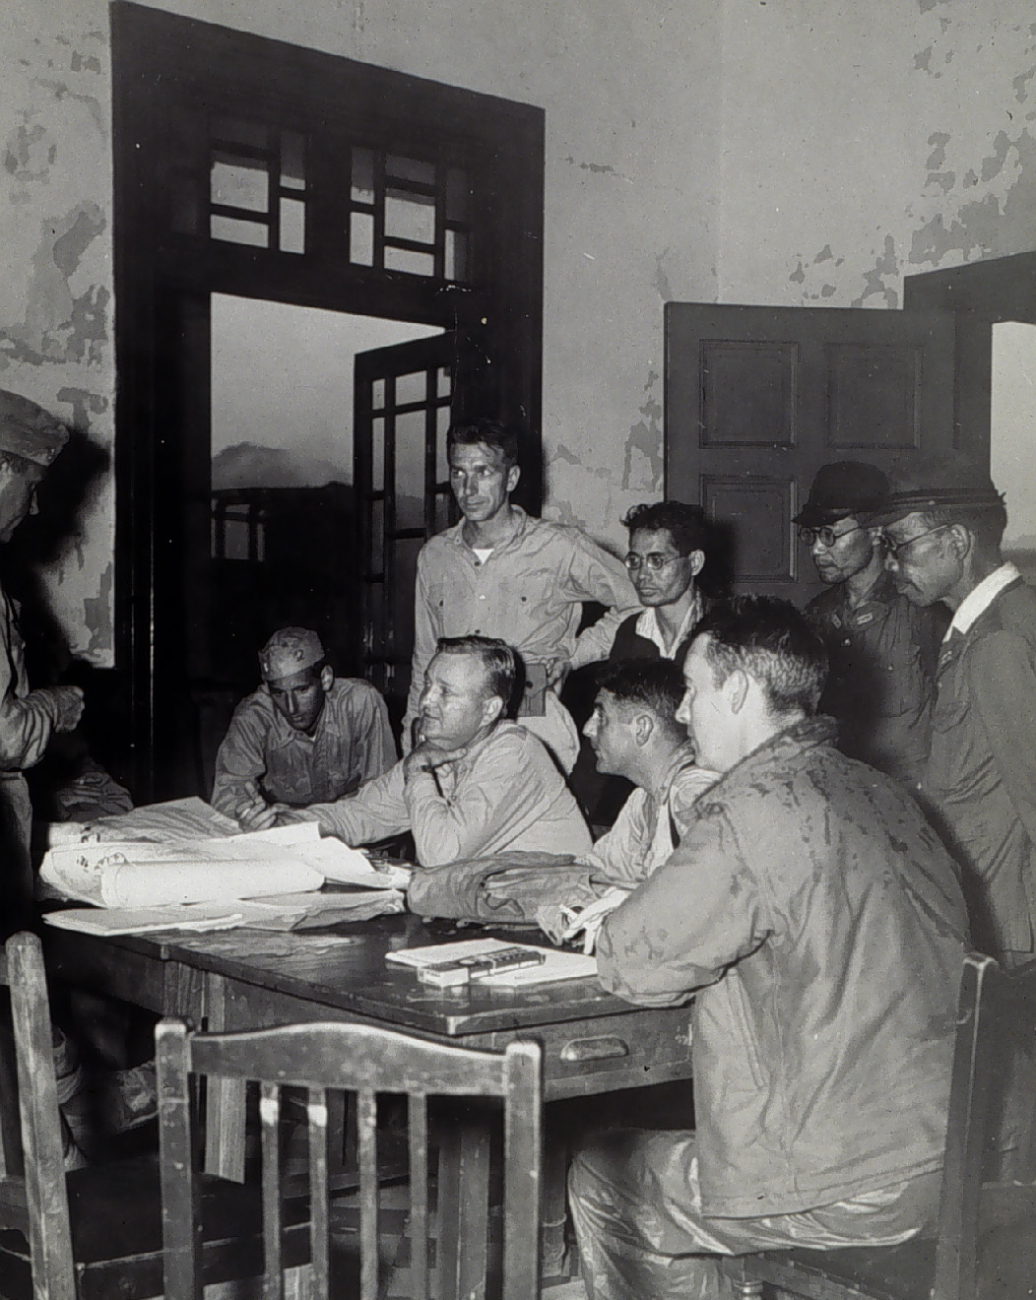 Norman Porter at Sasebo, Japan, with port authorities